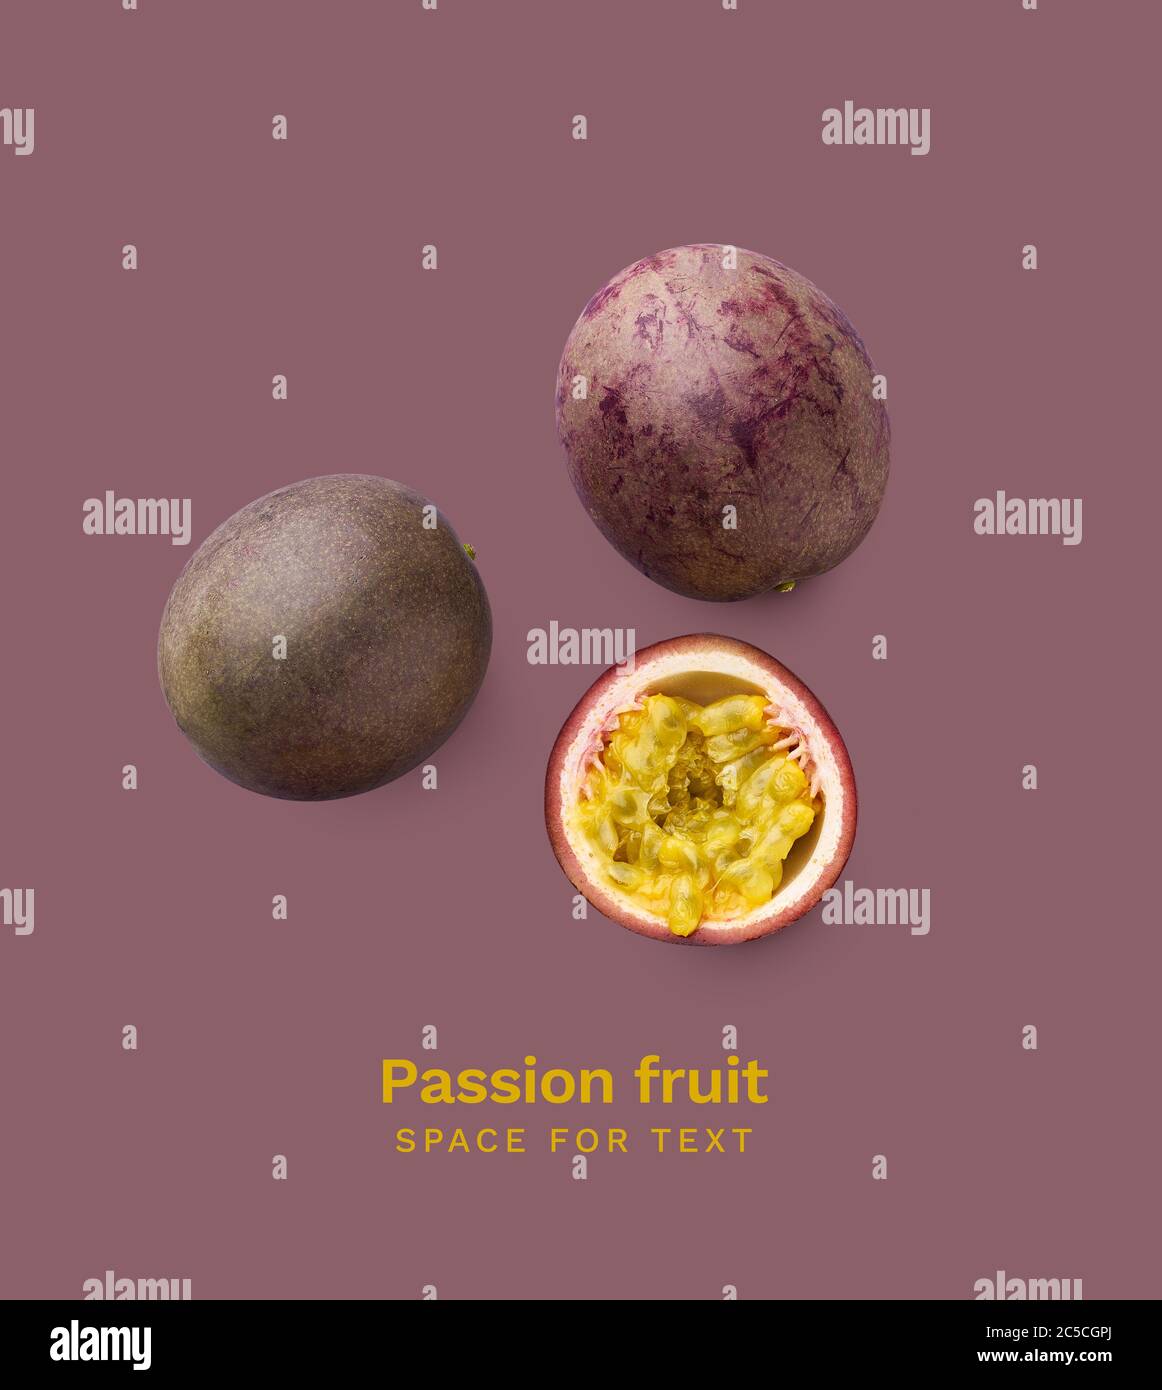 Whole and sliced passion fruit or maracuya isolated on purple background. Top view layout with copy space Stock Photo